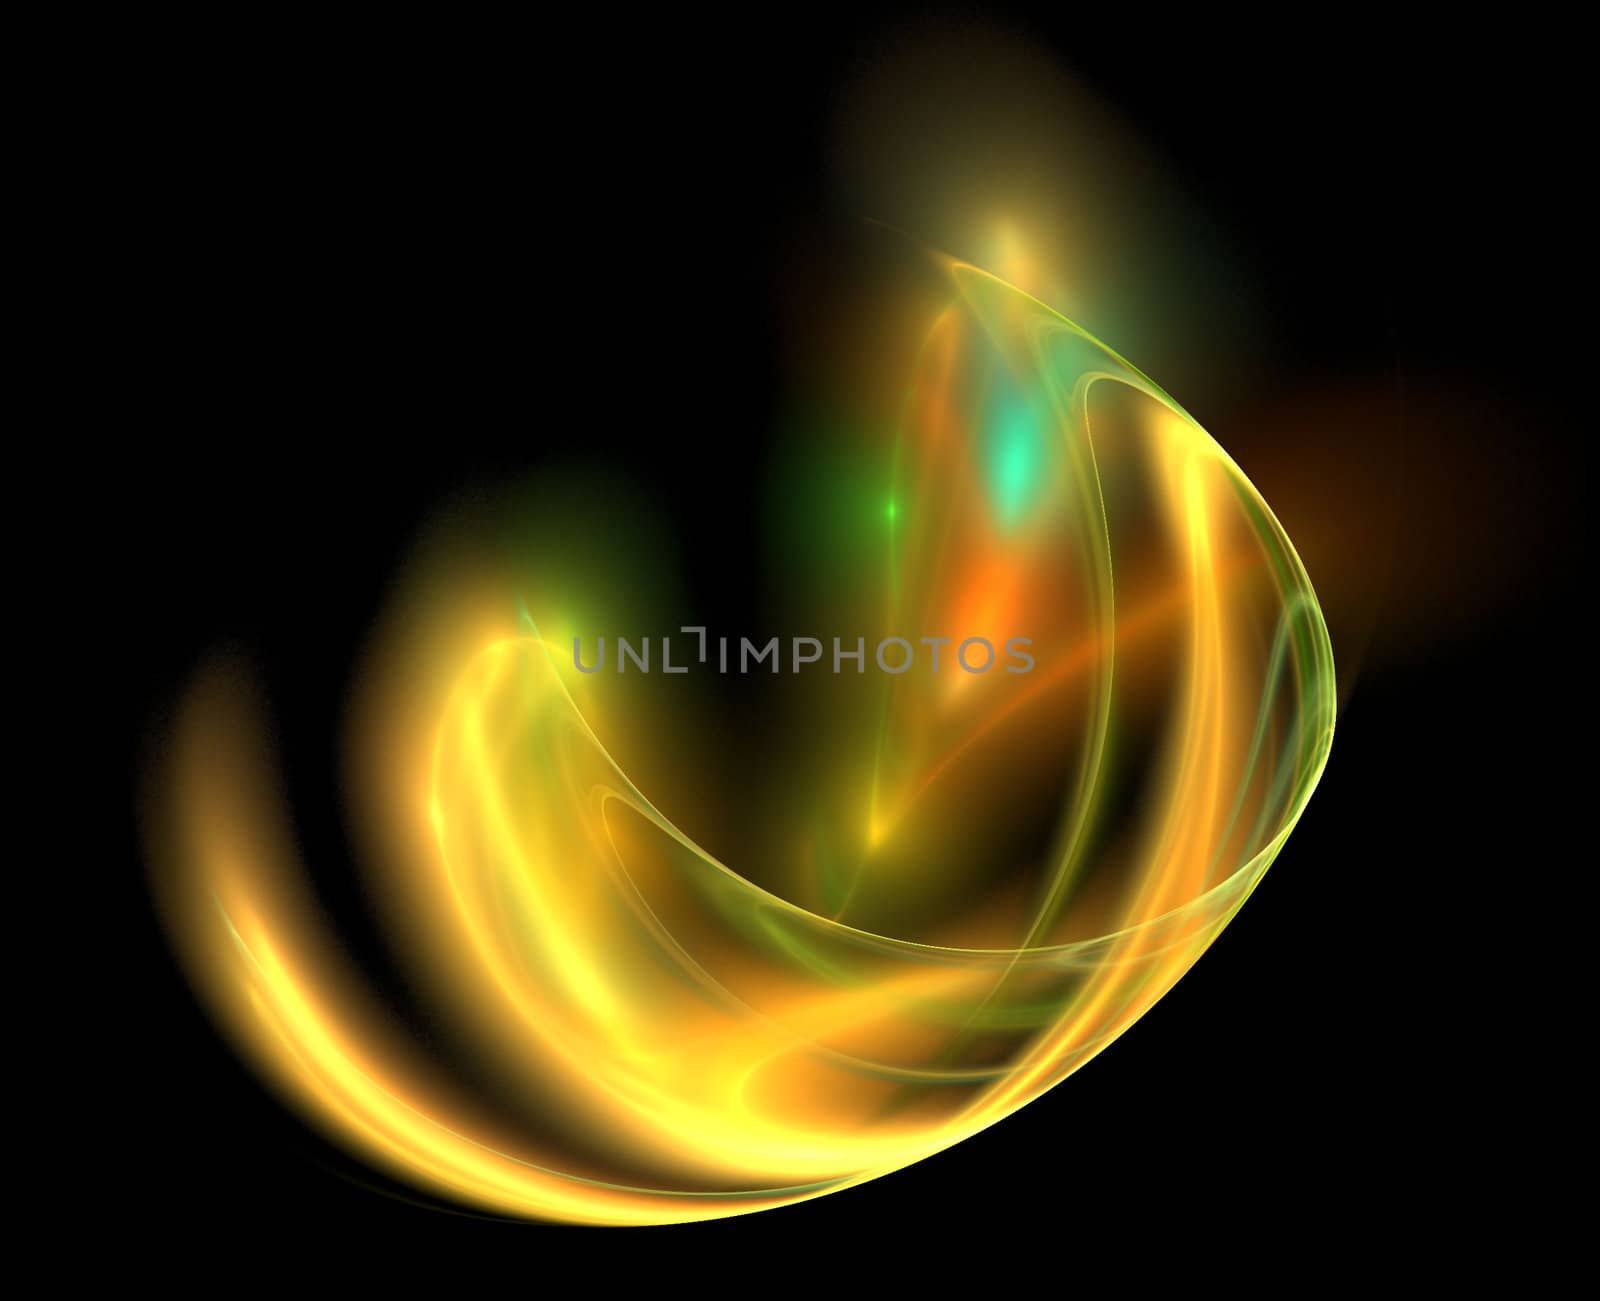 Abstract background - creative element for your art - design by mozzyb